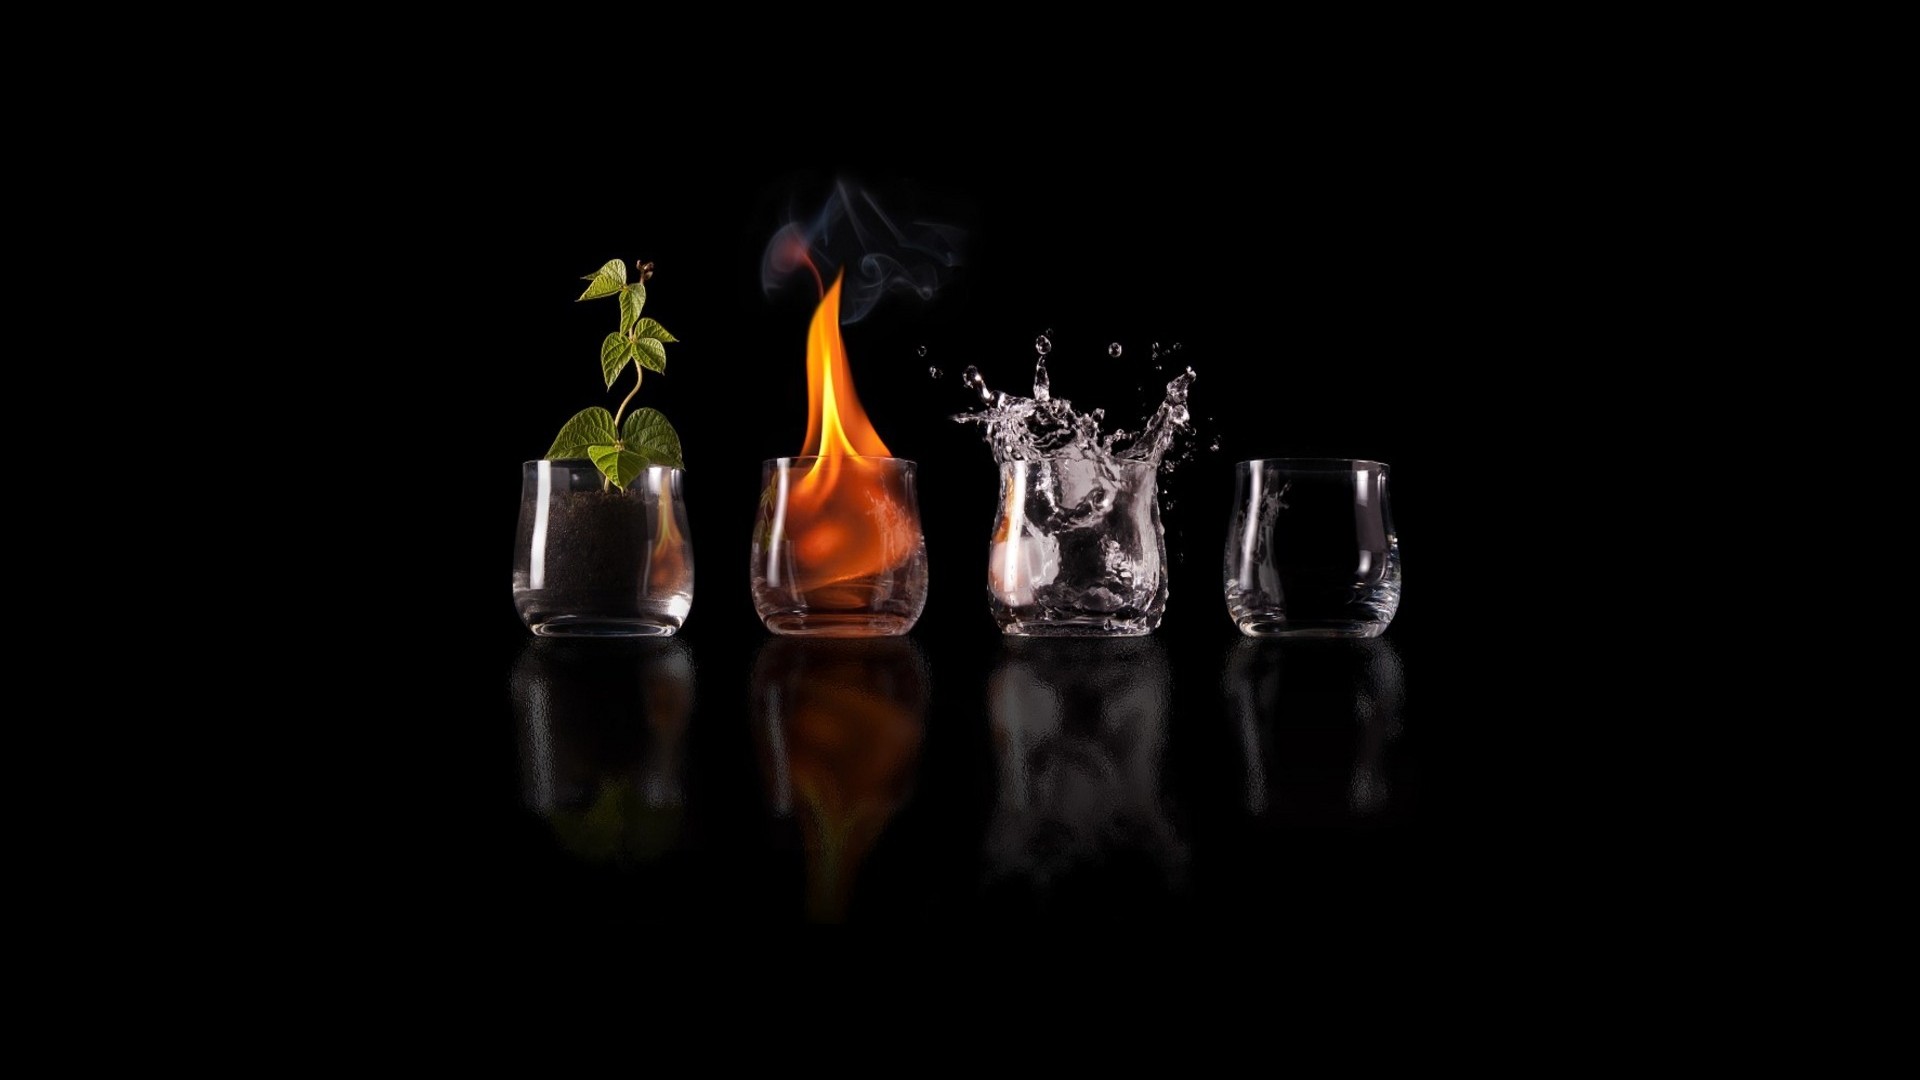 General 1920x1080 glass fire water black reflection four elements Earth air nature drinking glass plants science fiction elements humor digital art black background liquid